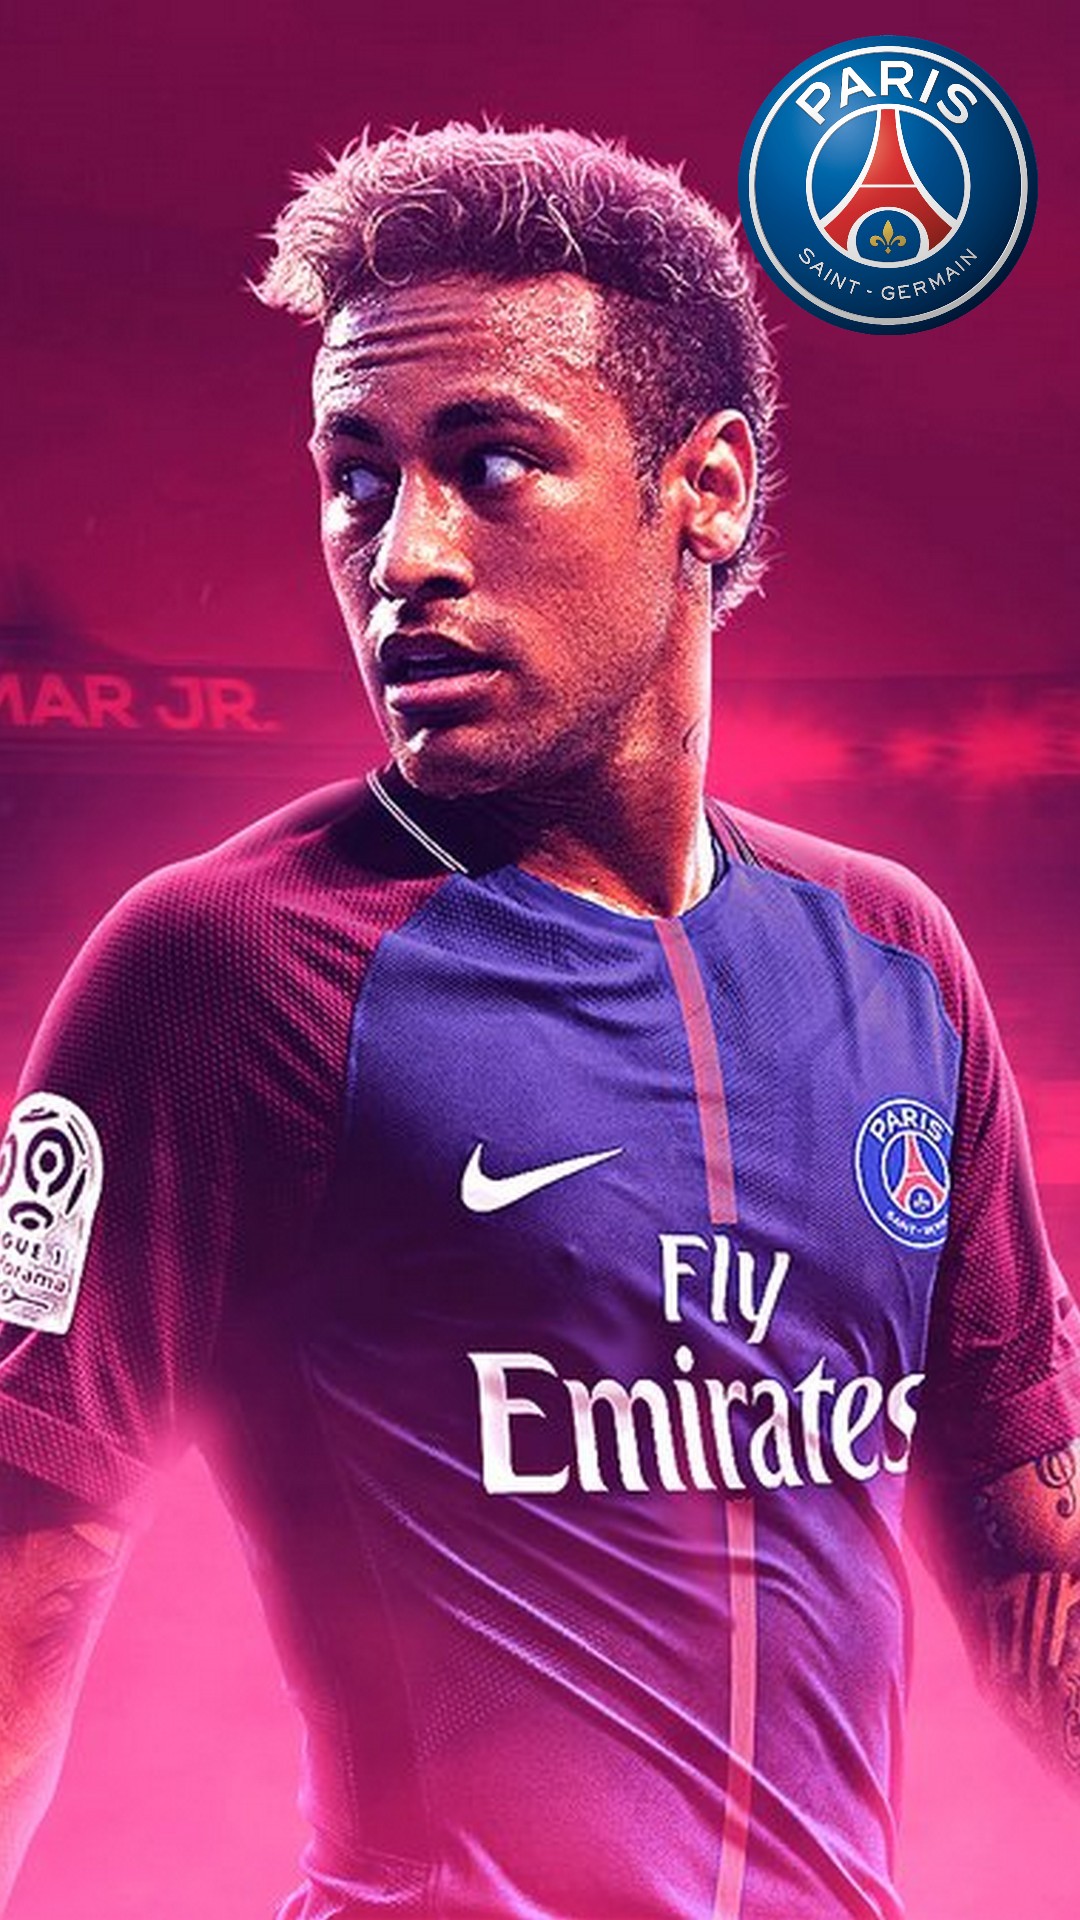 iPhone Wallpaper HD Neymar PSG With Resolution 1080X1920 pixel. You can make this wallpaper for your Mac or Windows Desktop Background, iPhone, Android or Tablet and another Smartphone device for free